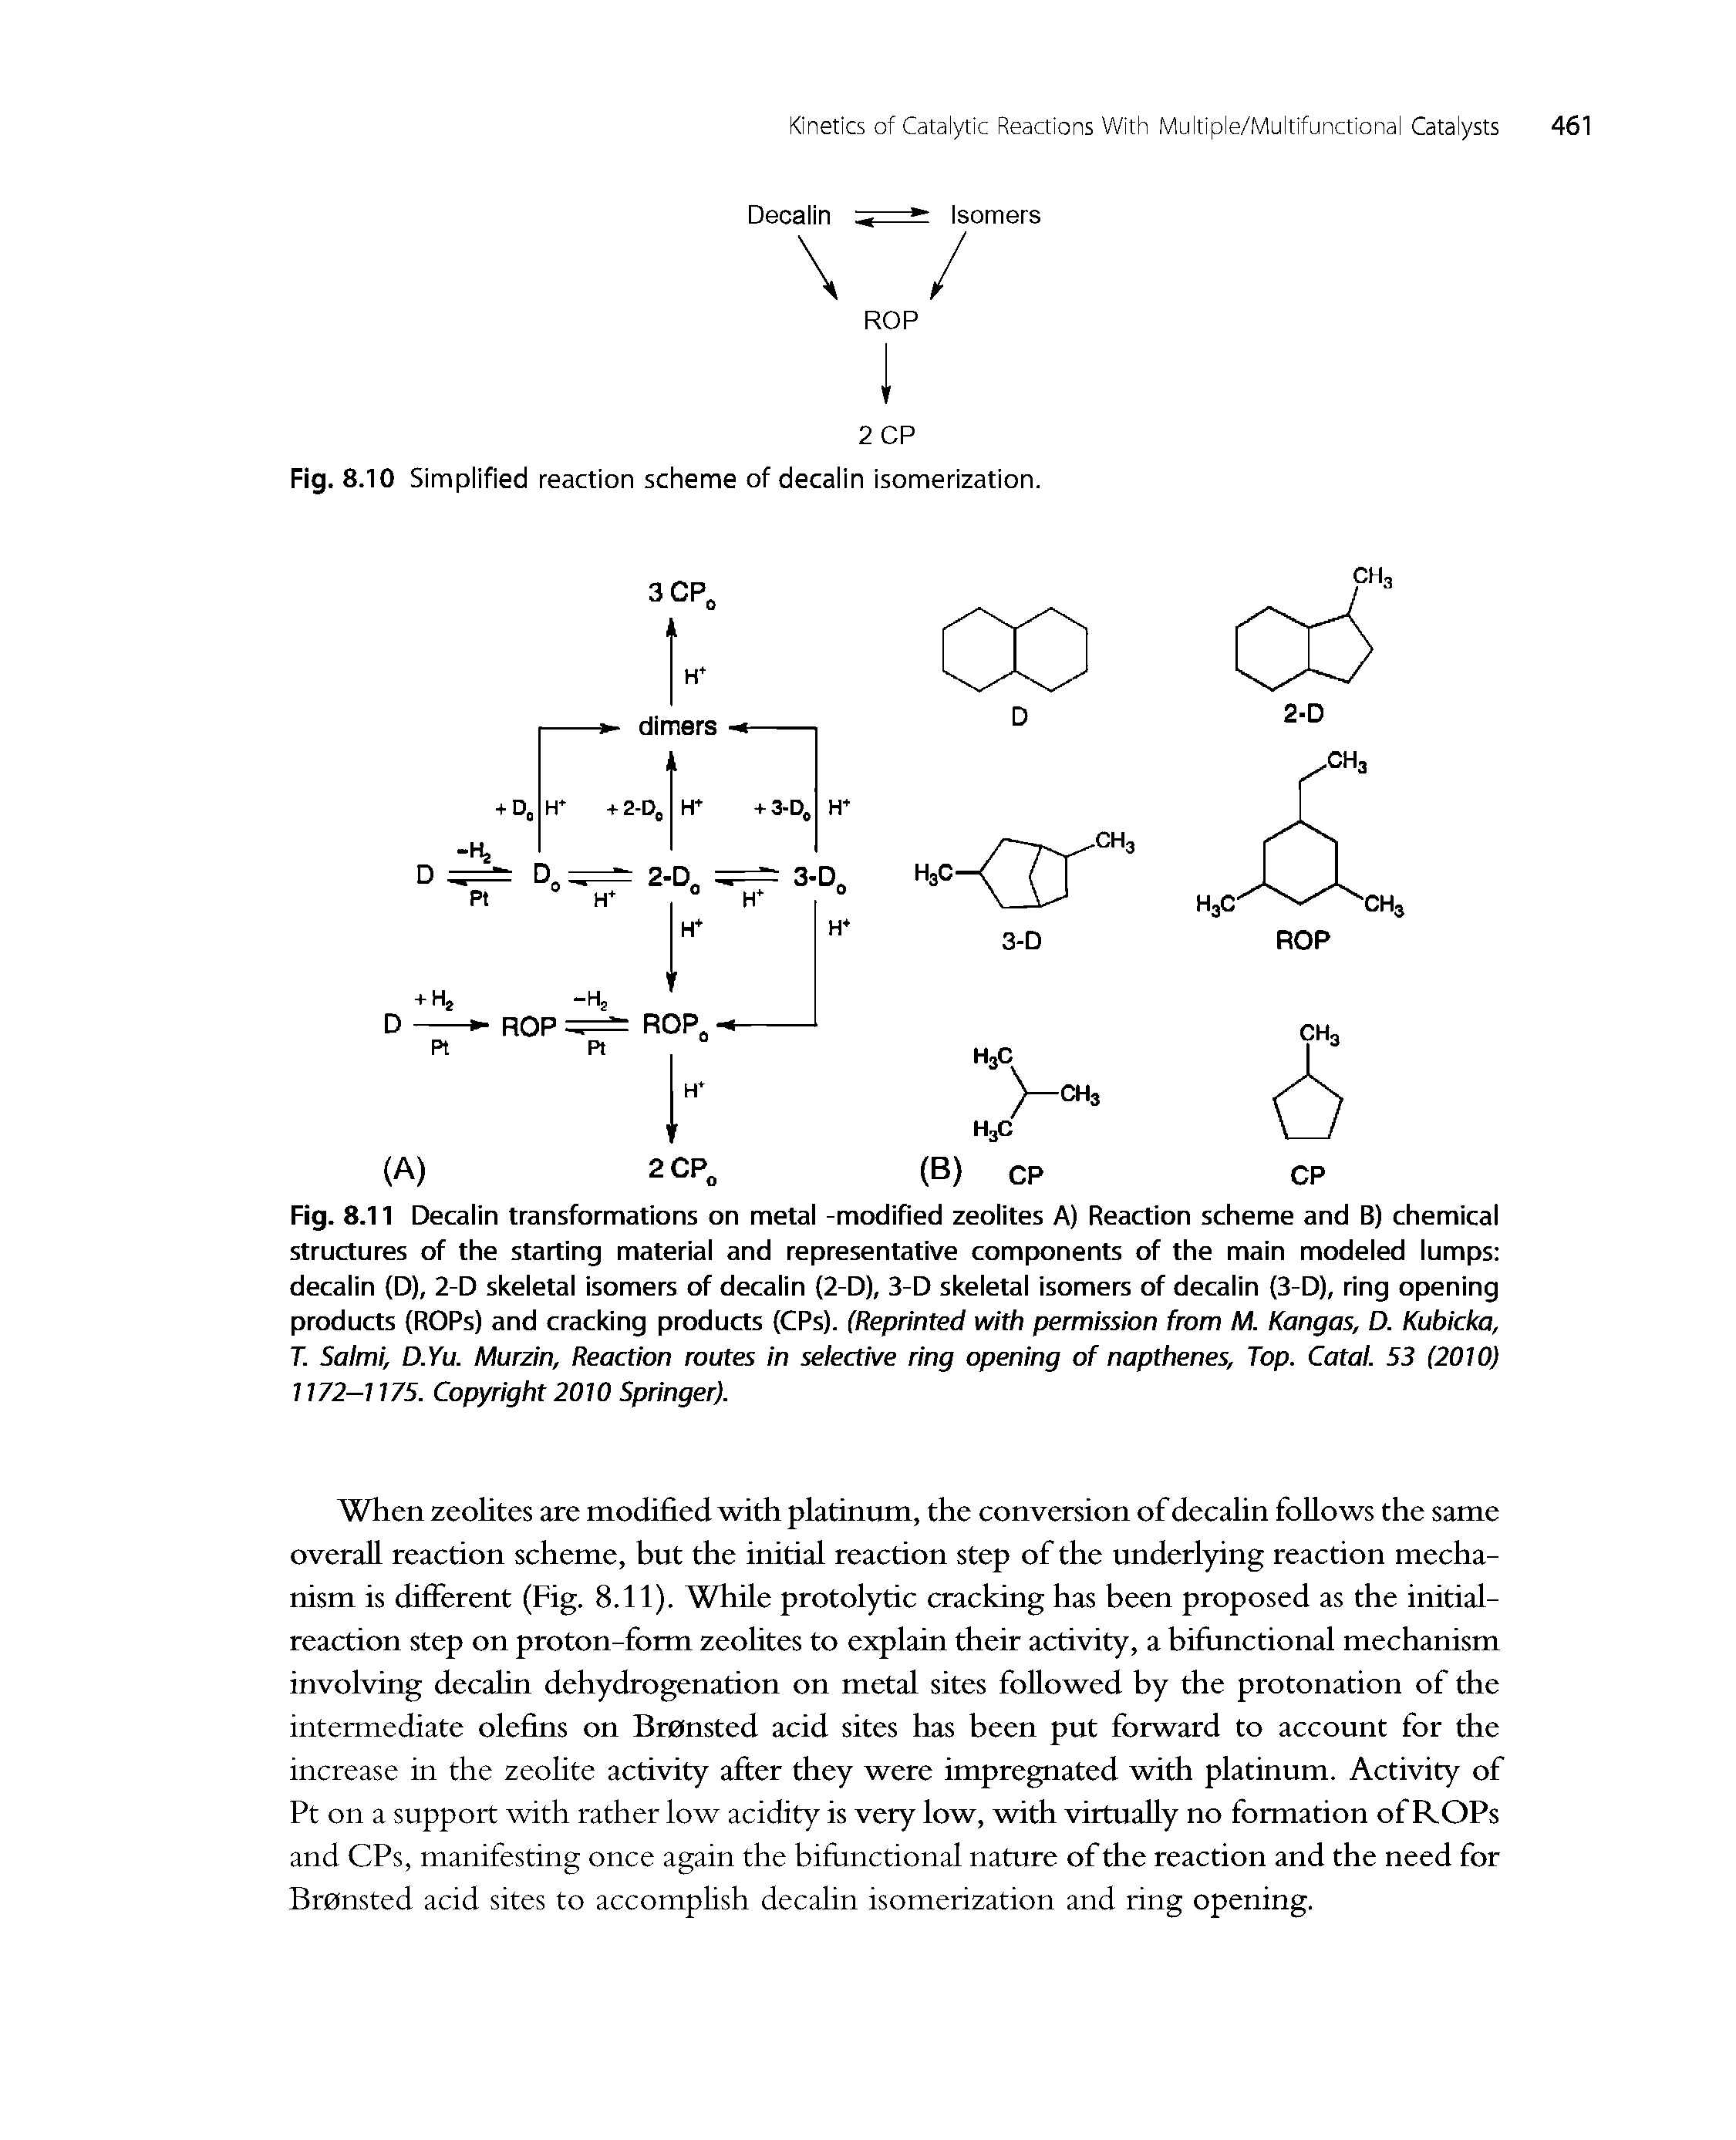 Fig. 8.11 Decalin transformations on metal -modified zeolites A) Reaction scheme and B) chemical structures of the starting material and representative components of the main modeled lumps decalin (D), 2-D skeletal isomers of decalin (2-D), 3-D skeletal isomers of decalin (3-D), ring opening products (ROPs) and cracking products (CPs). (Reprinted with permission from M. Kangas, D. Kubicka, T Salmi, D.Yu. Murzin, Reaction routes in selective ring opening of napthenes. Top. Catal. 53 (2010) 1172—1175. Copyright 2010 Springer).